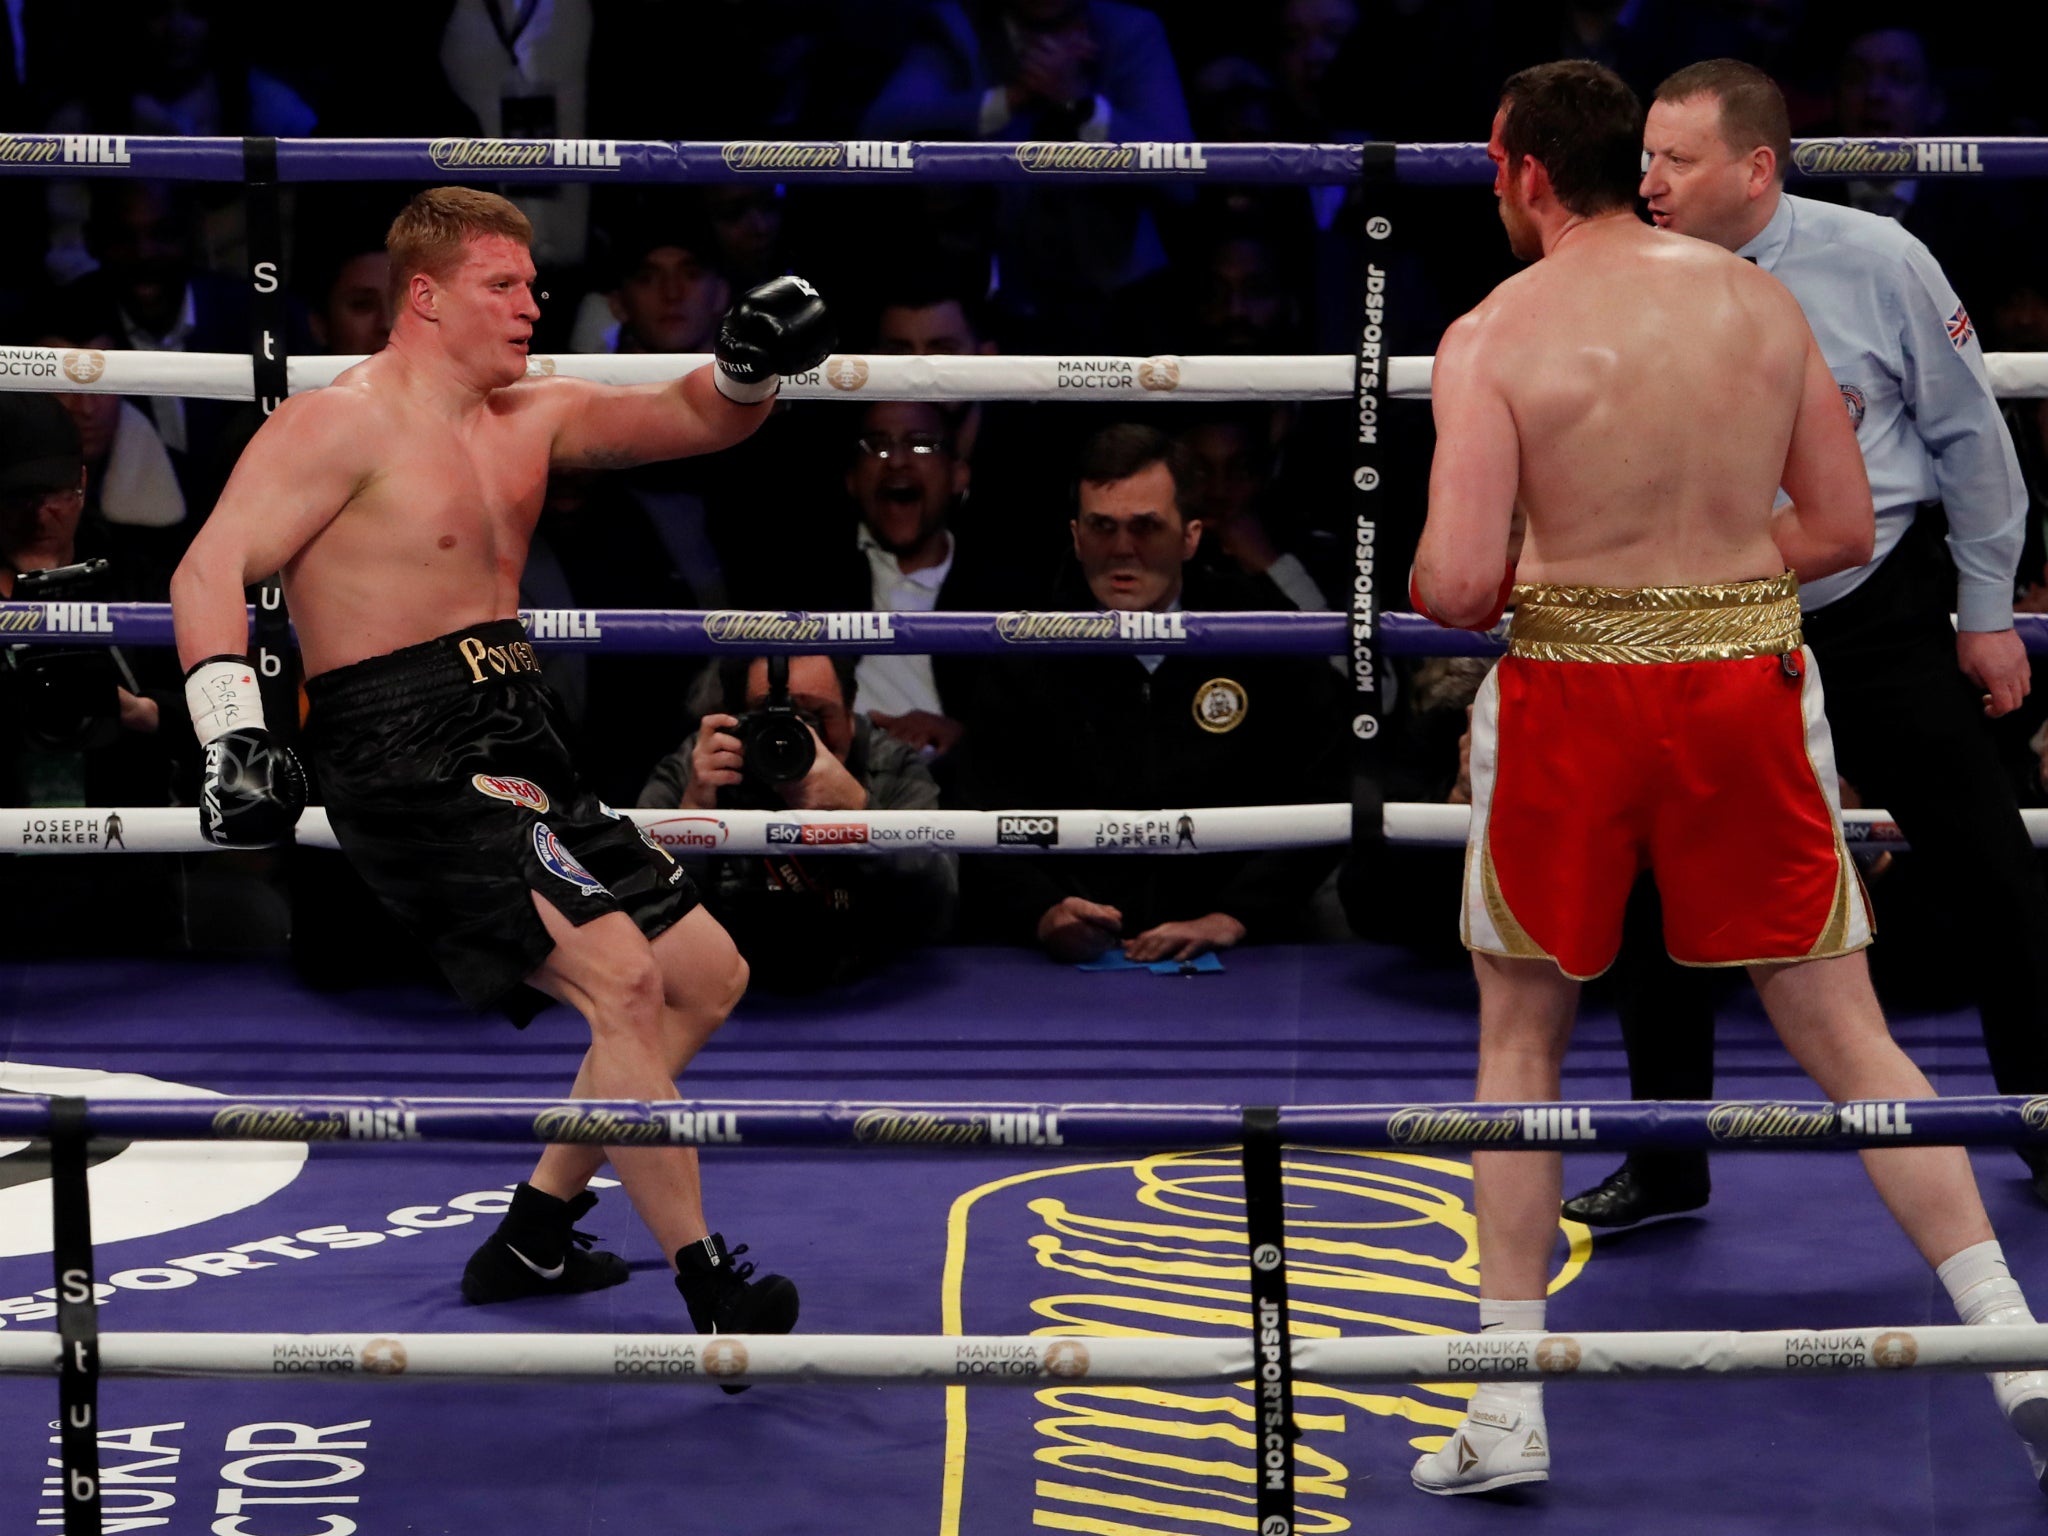 Povetkin was sent sprawling to the corner by Price seconds after his own knockdown